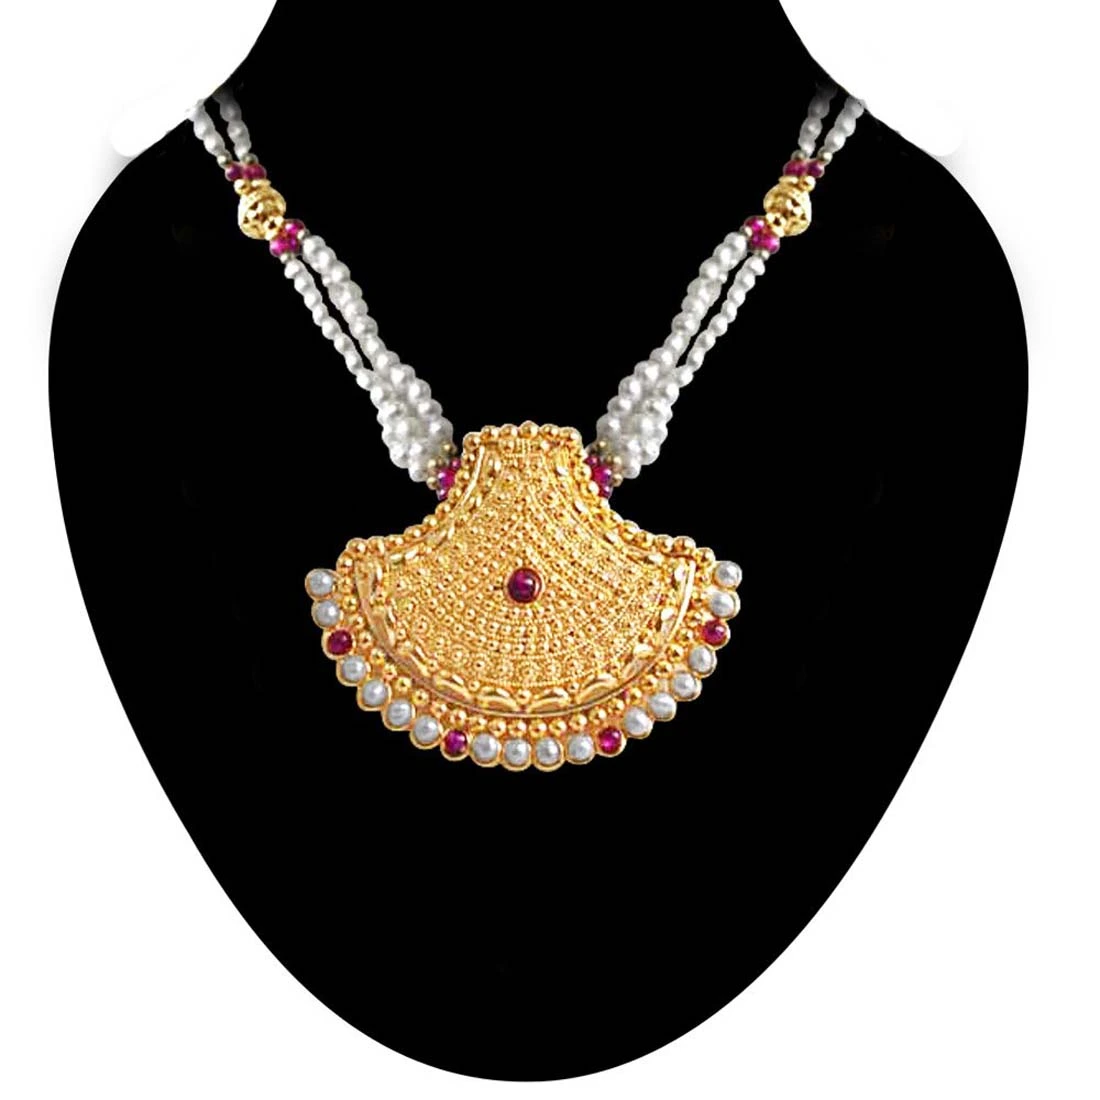 Pearl Glitters - Temple Design Gold Plated Pendant & Three Line Freshwater Pearl & Red Garnet Beads Necklace for Women (SNP10)